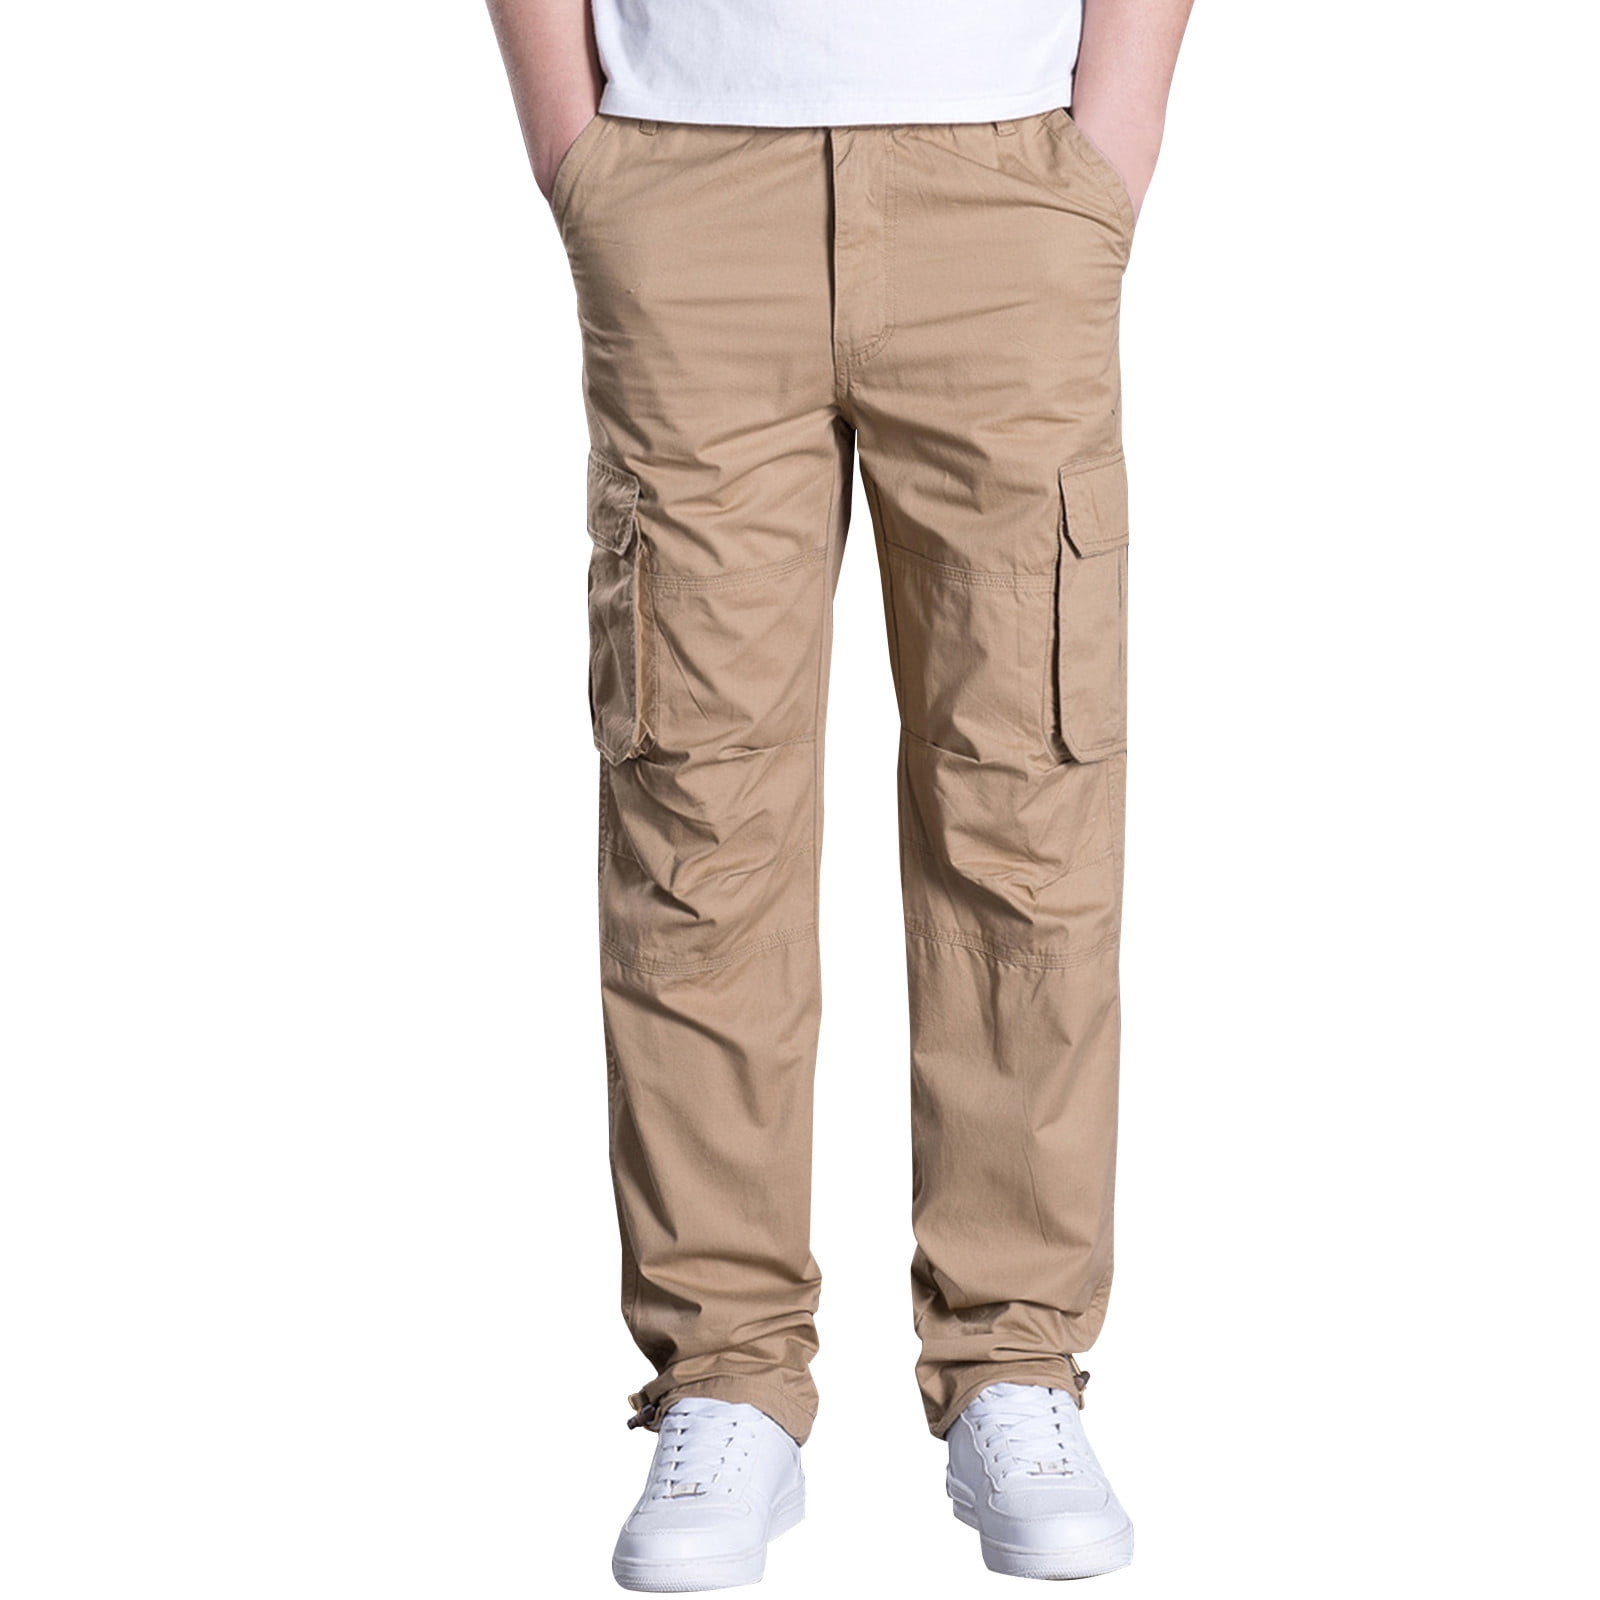 HTNBO Men Cotton Pure Cargo Pants with Pockets Straight Leg Trousers  Crochet Pants End-of-season Clearance